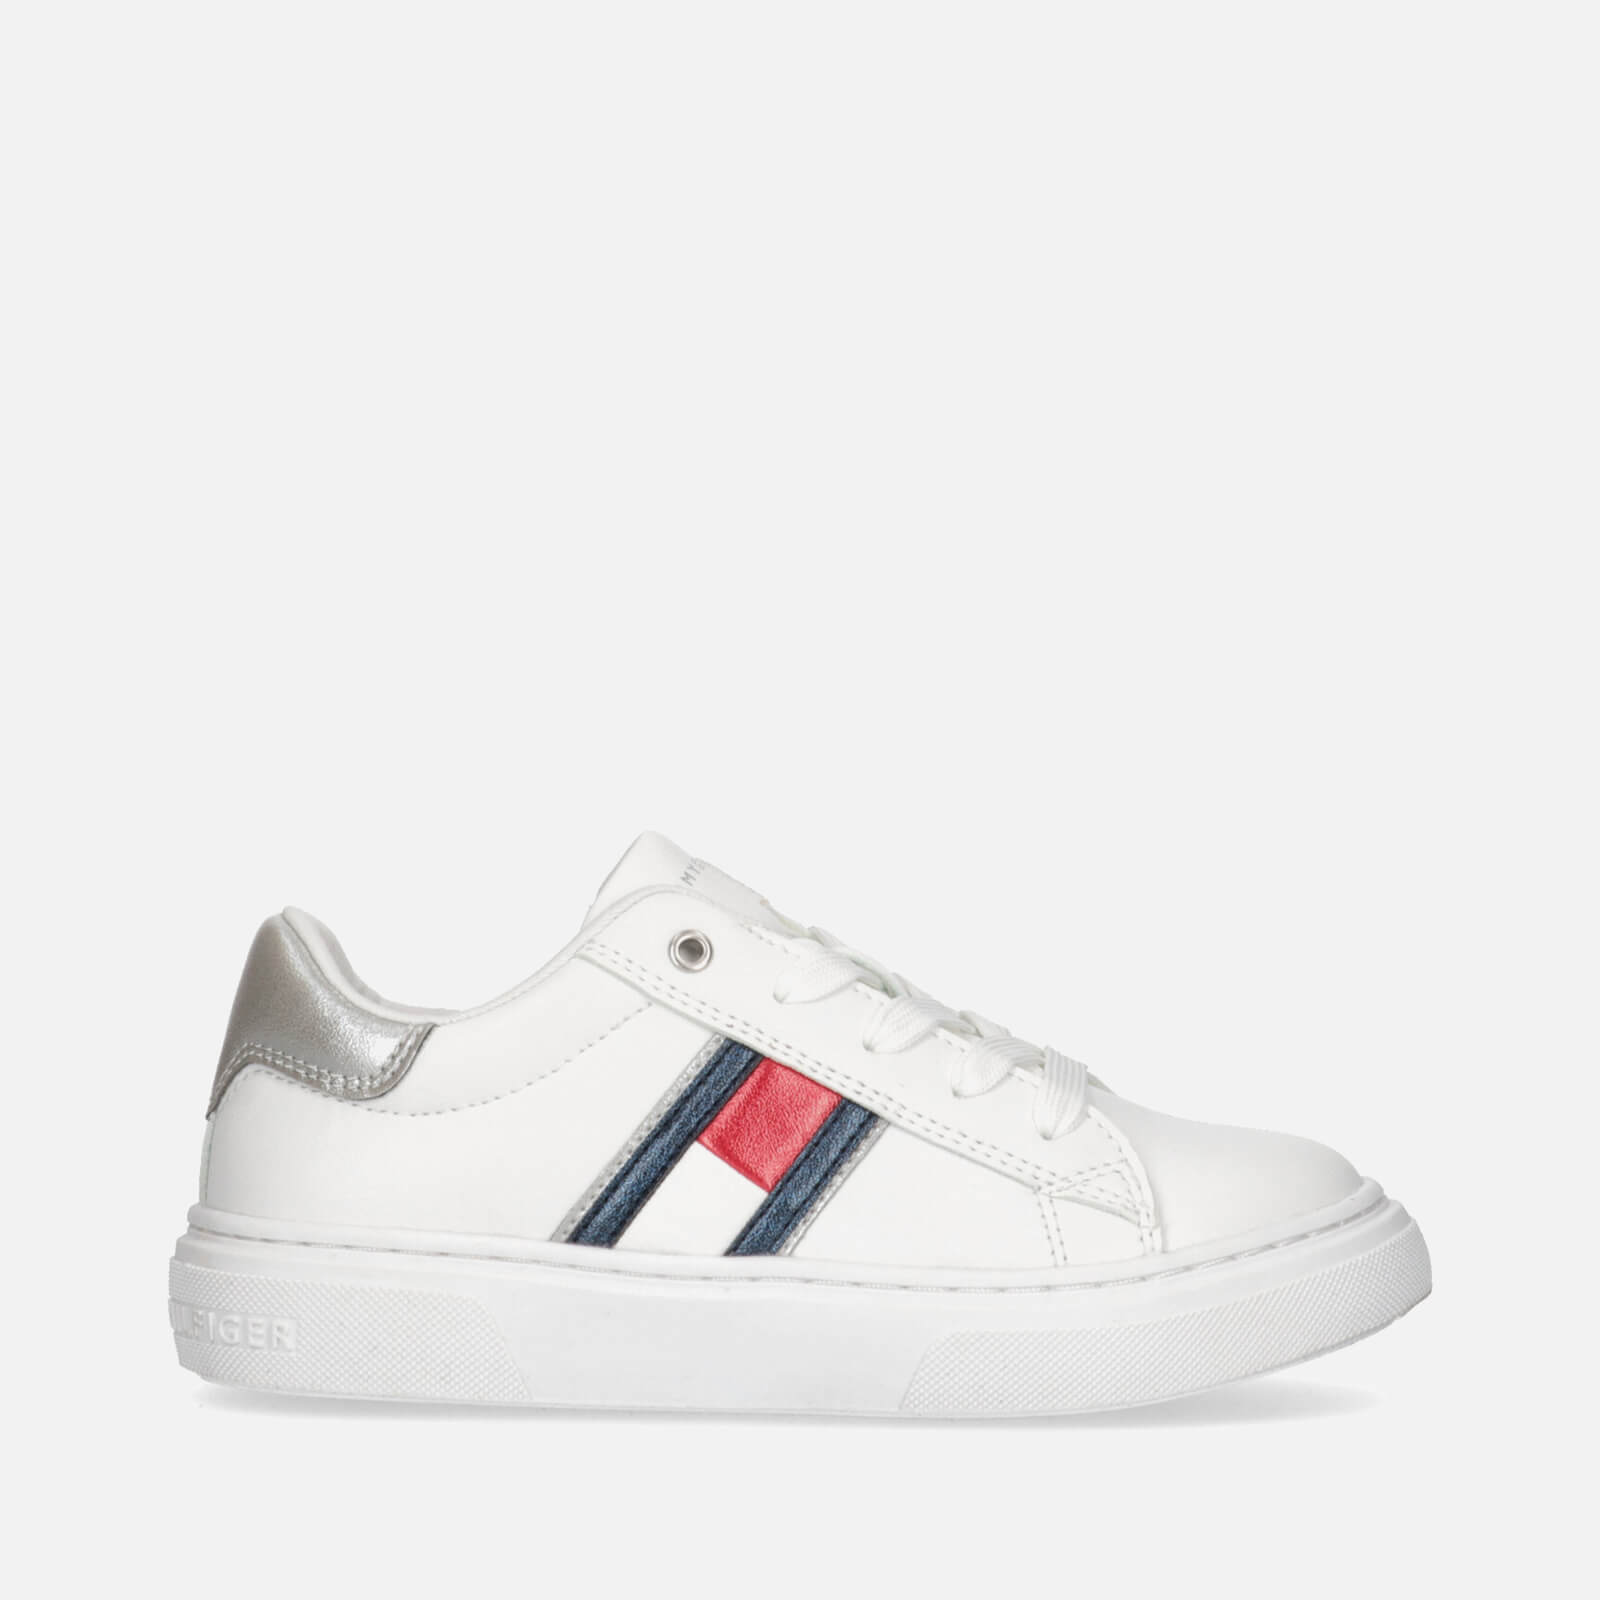 Tommy Hilfiger Kids' Flag Low Cut Lace Up Sneakers - White/Silver - UK 12 Kids